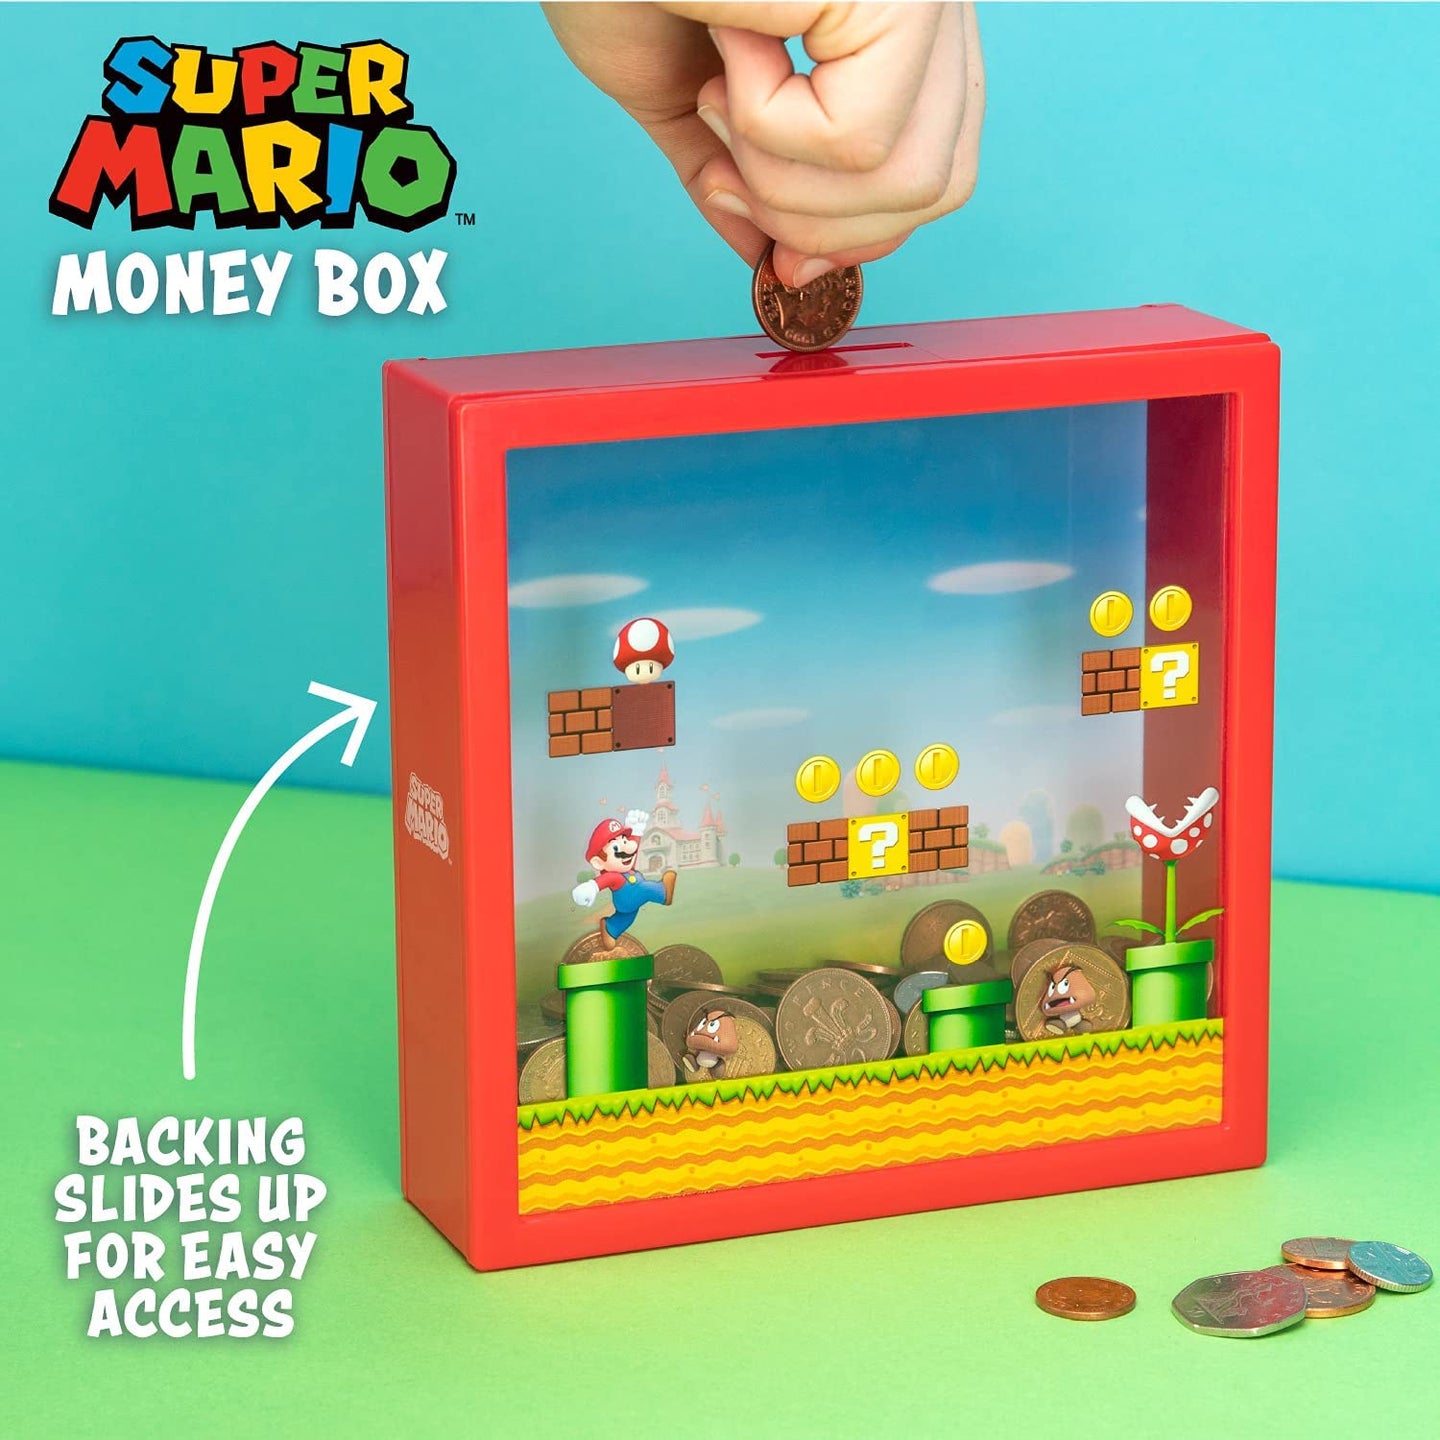 Super Mario Money Box showing hand putting coins in